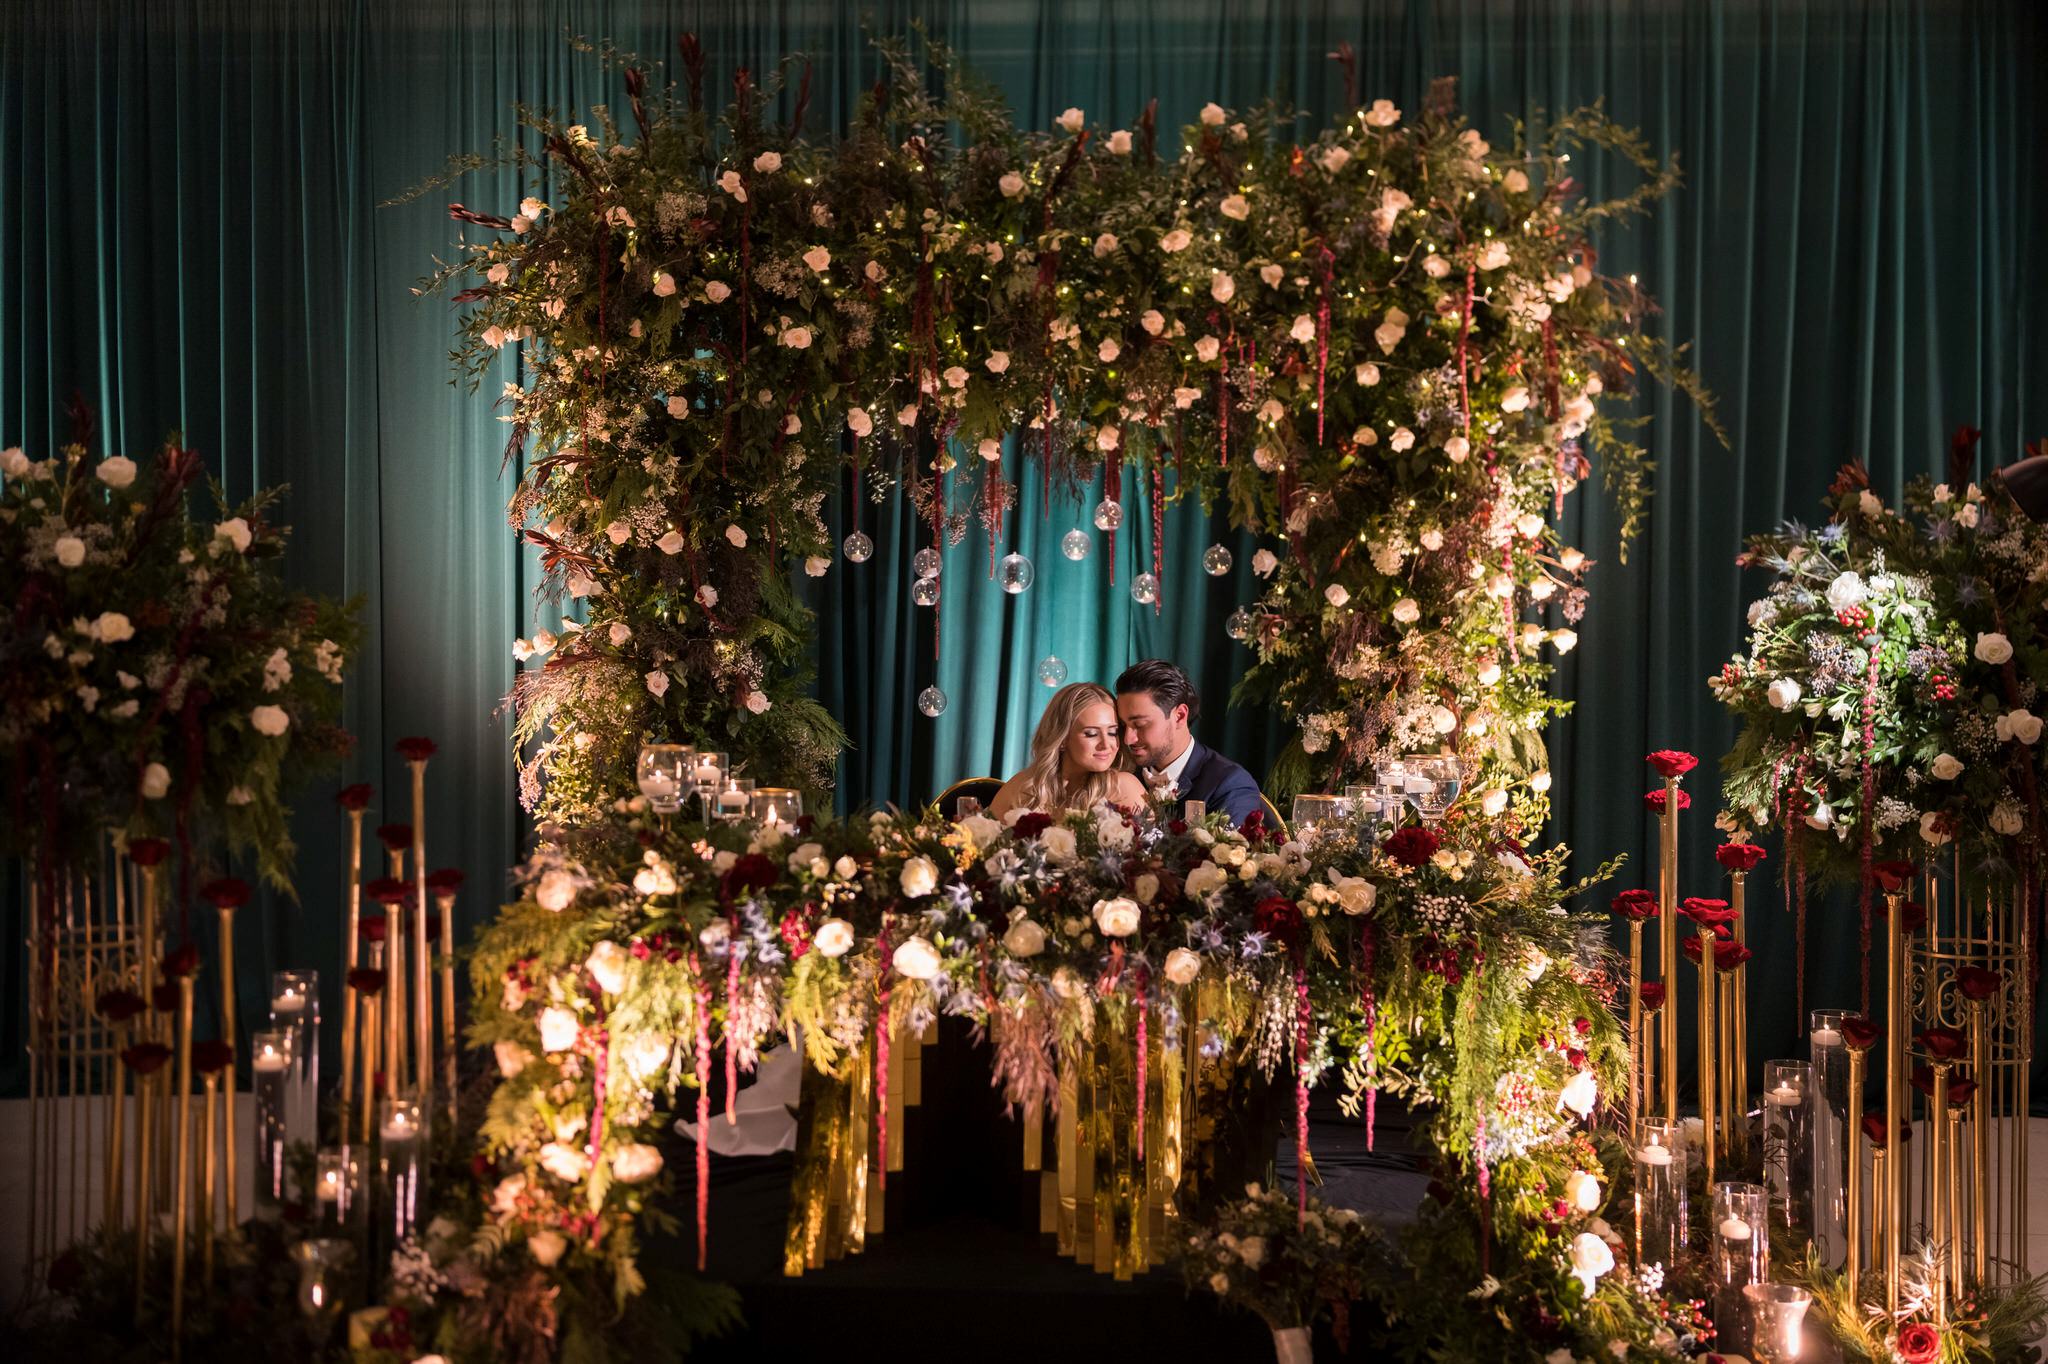 A couple poses seated amid floral arrangements at their Penna's of Sterling wedding reception.